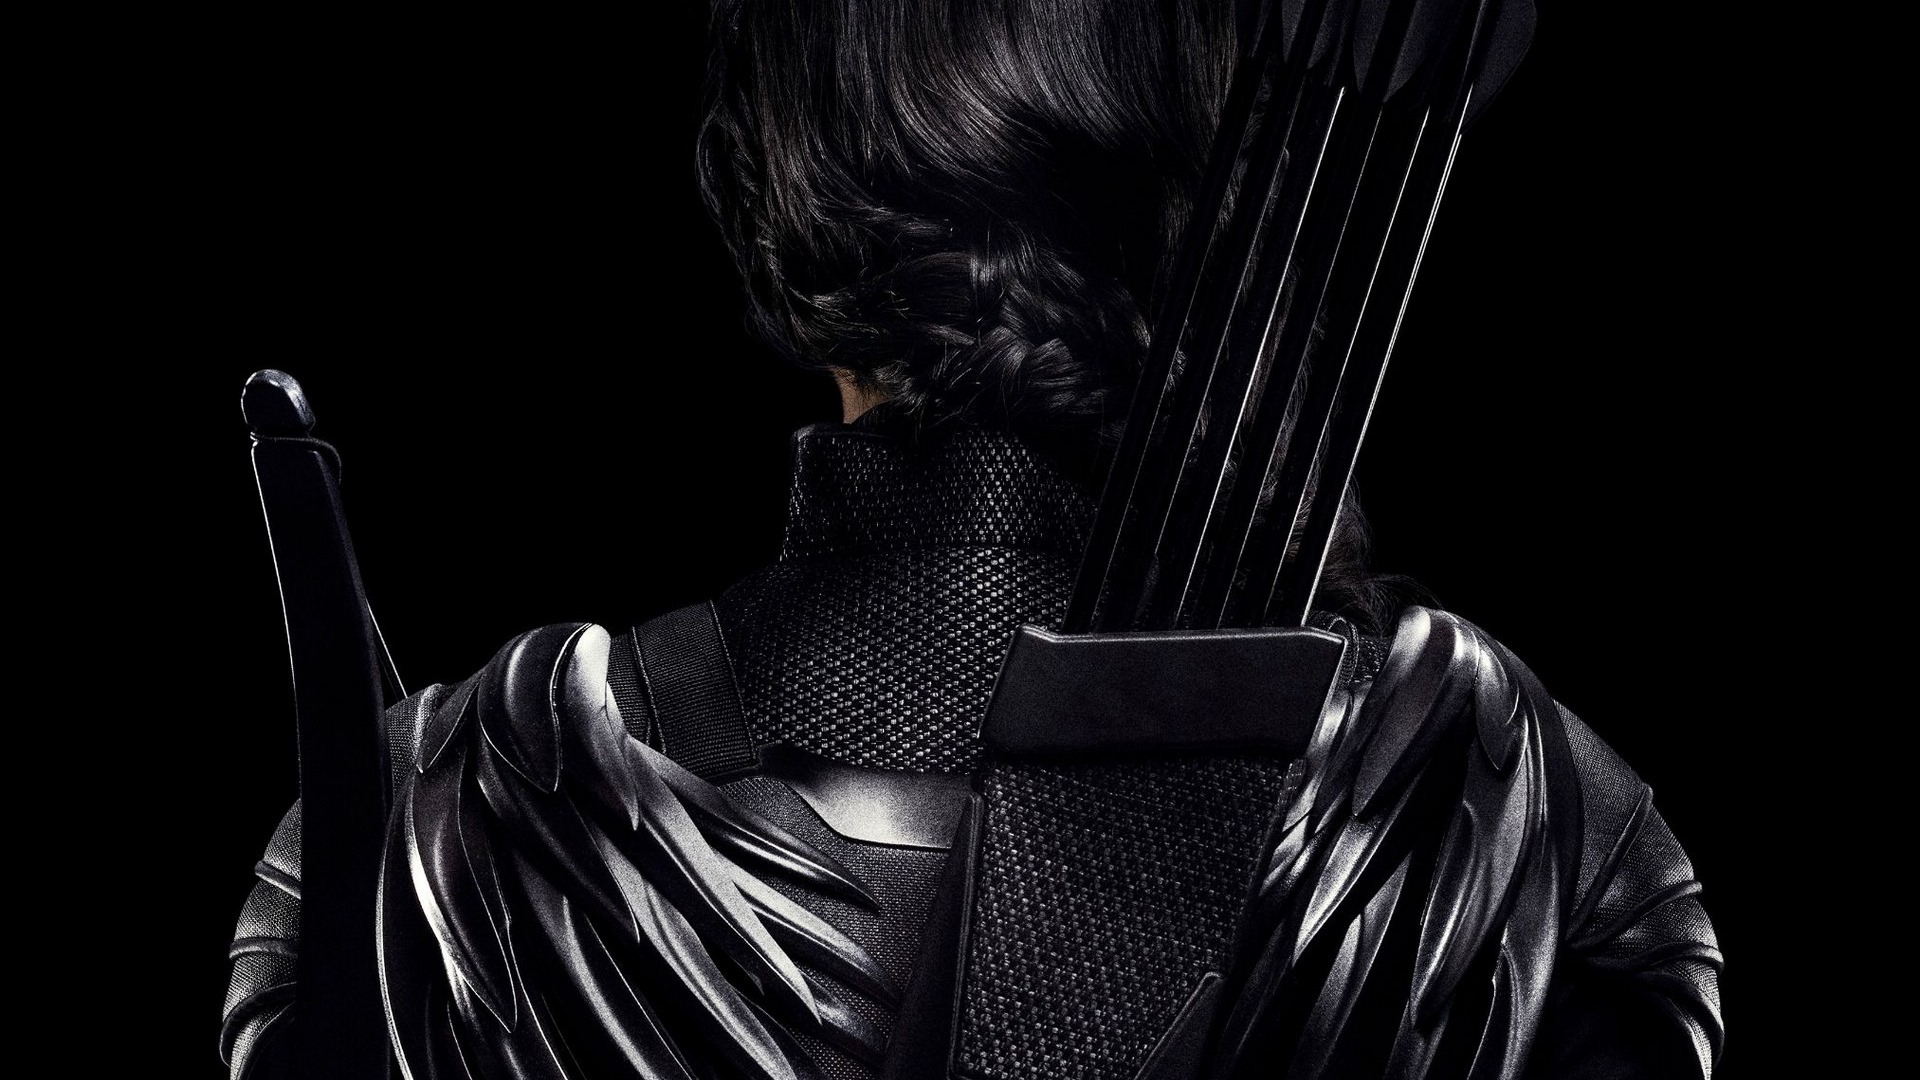 The Hunger Games: Mockingjay HD wallpapers #6 - 1920x1080